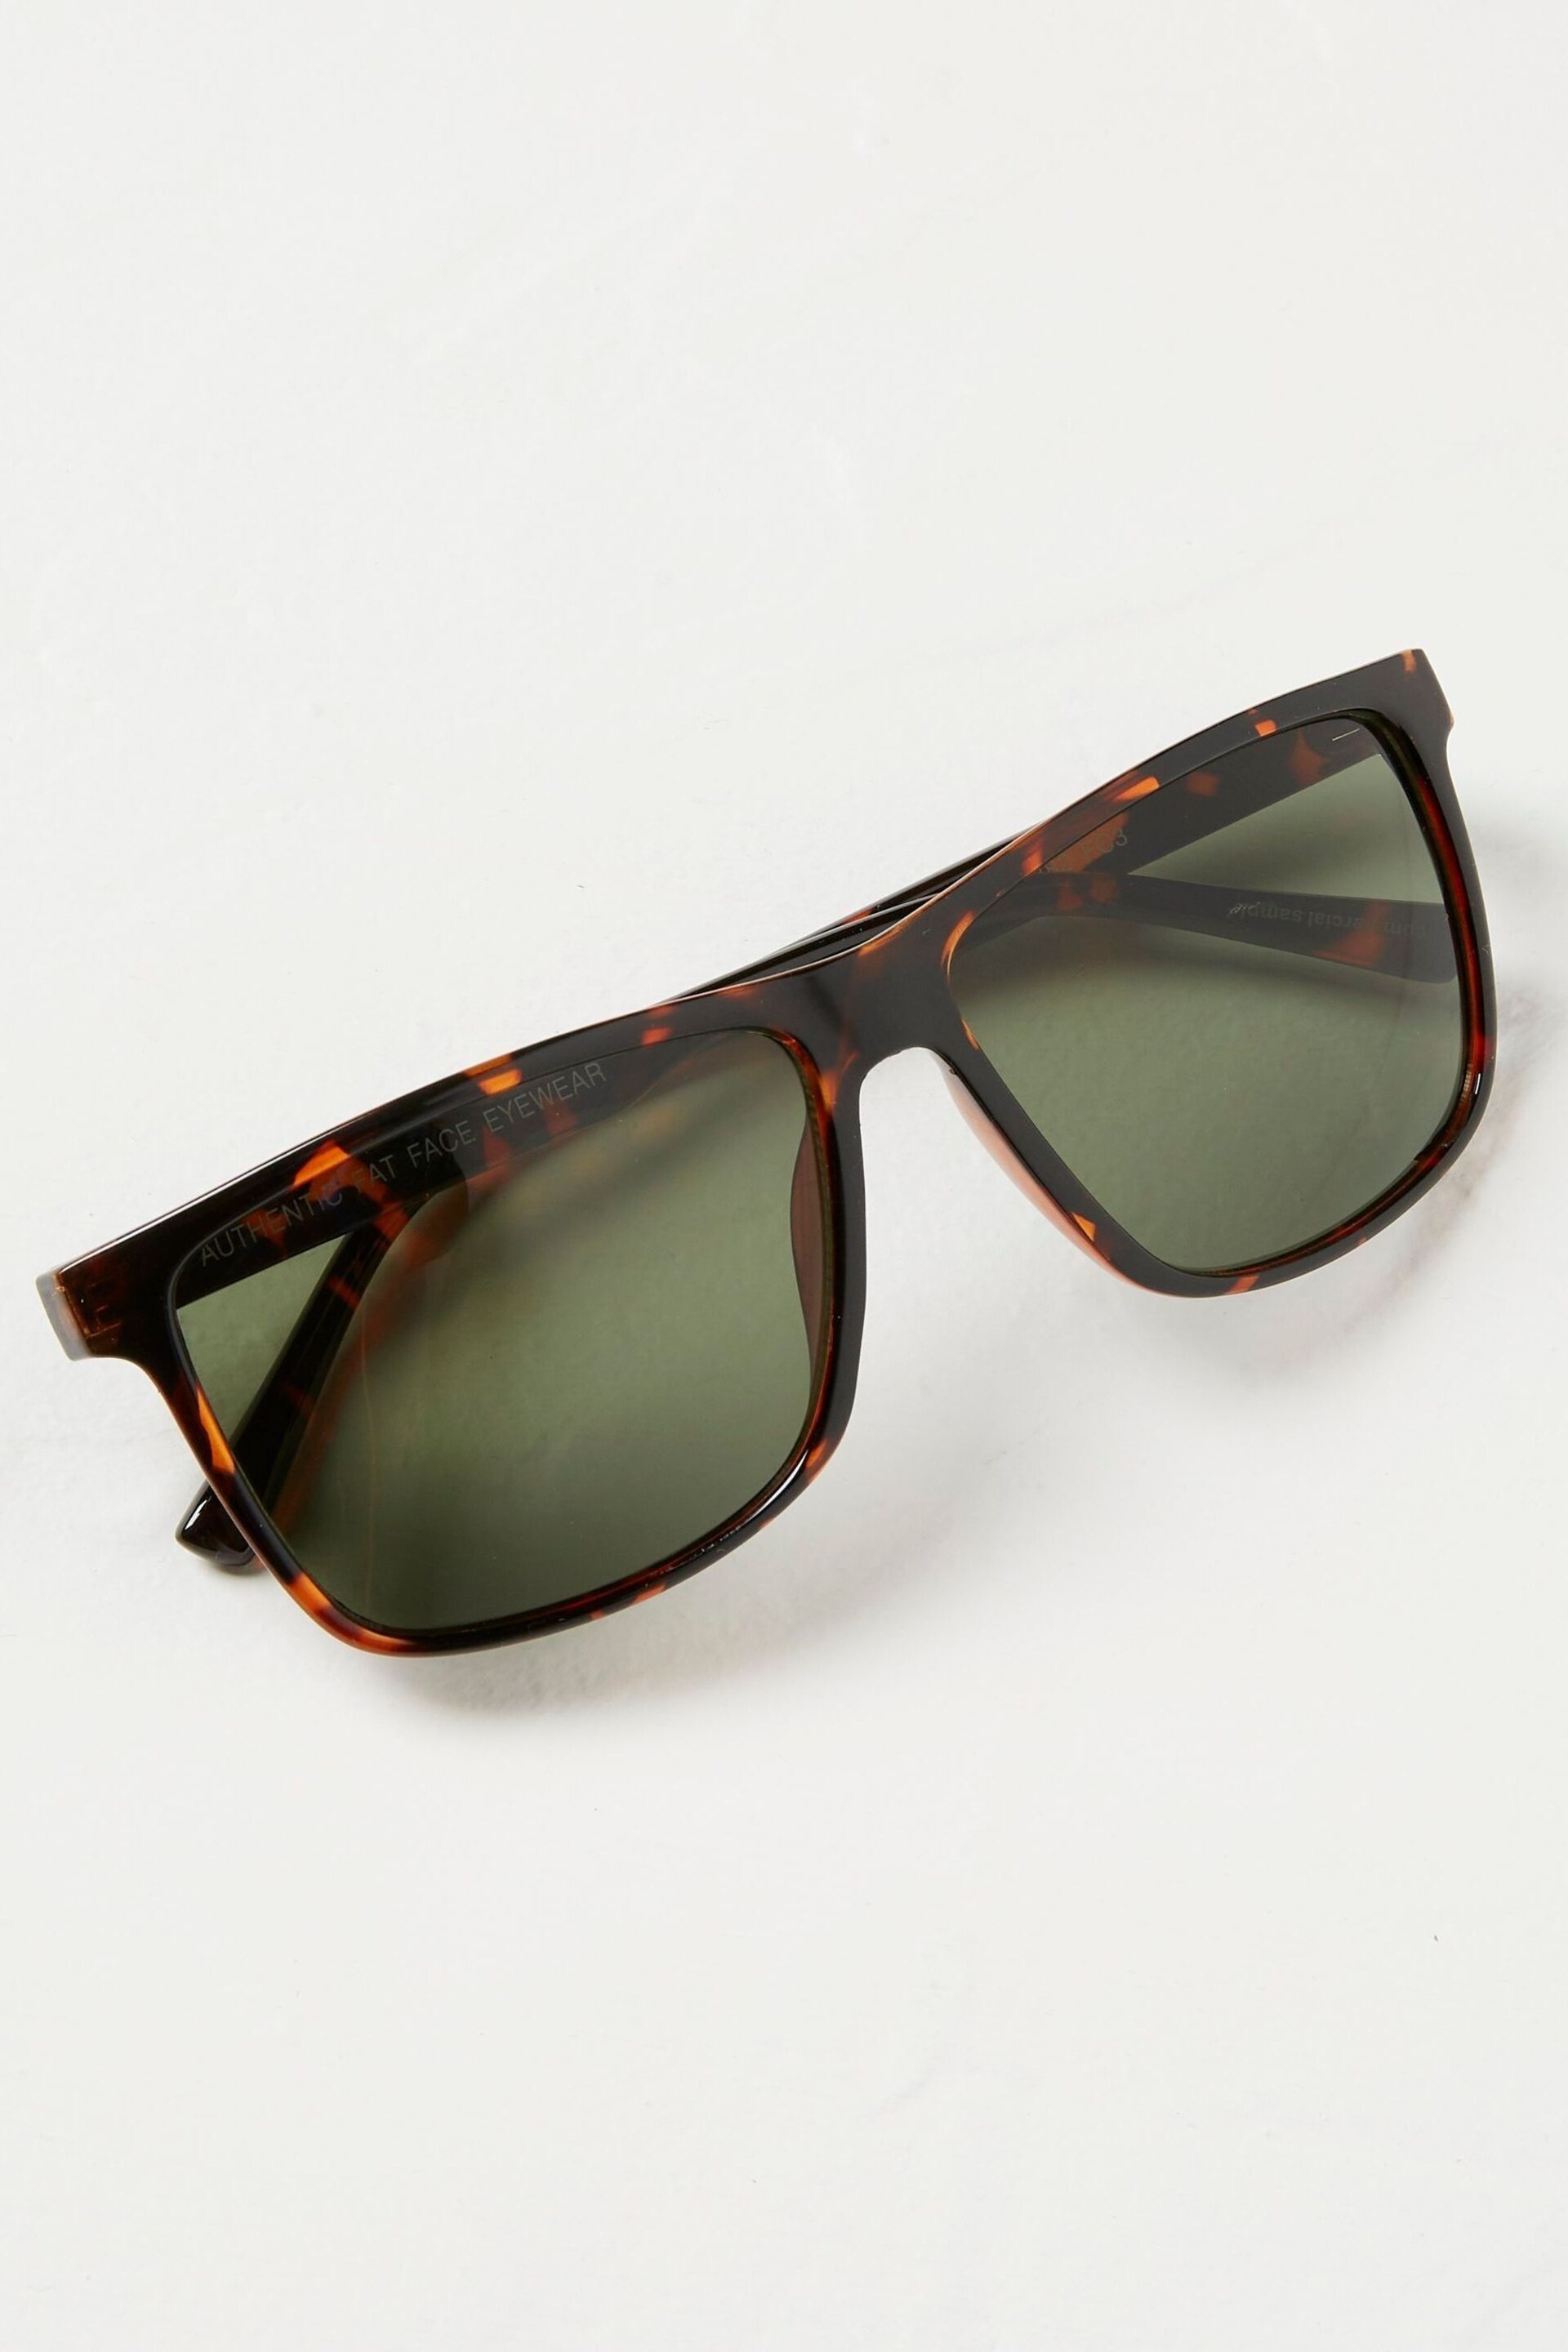 FatFace Brown Sunglasses - Image 1 of 2